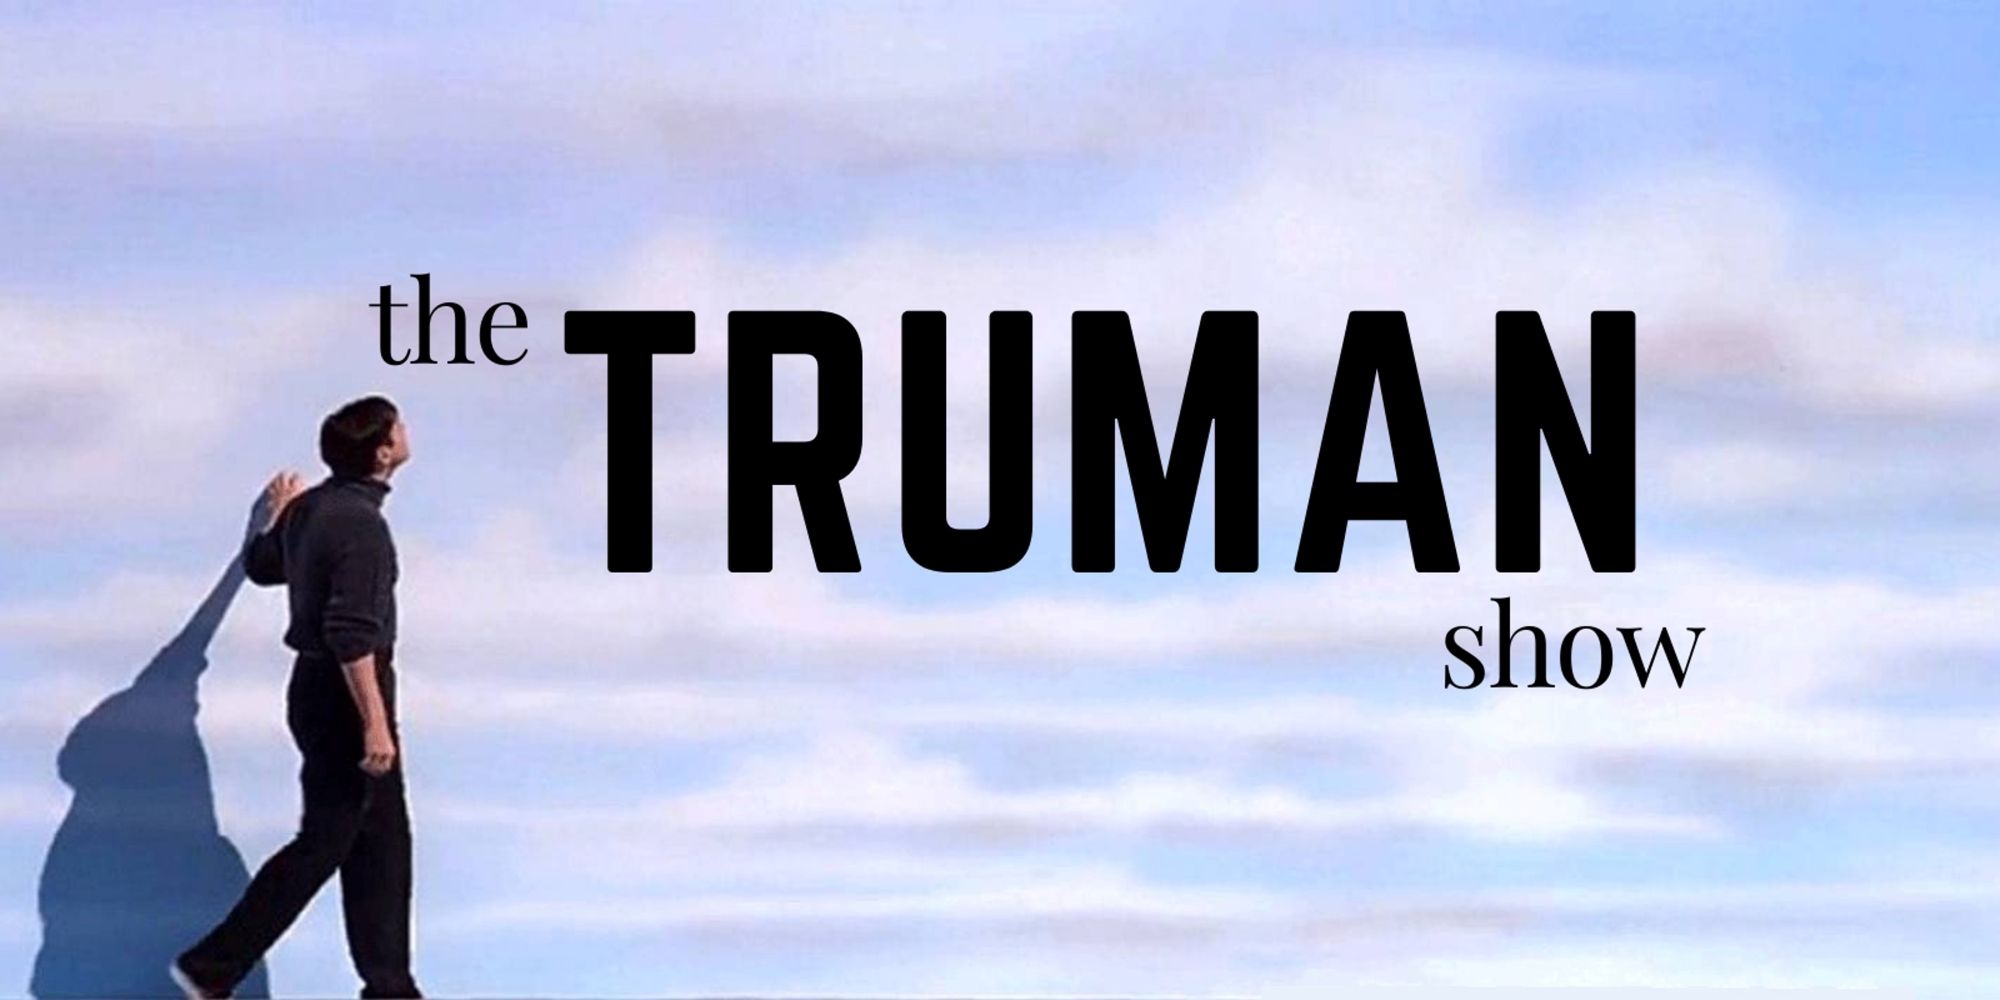 The Truman Show movie Banner, with Jim Carrey